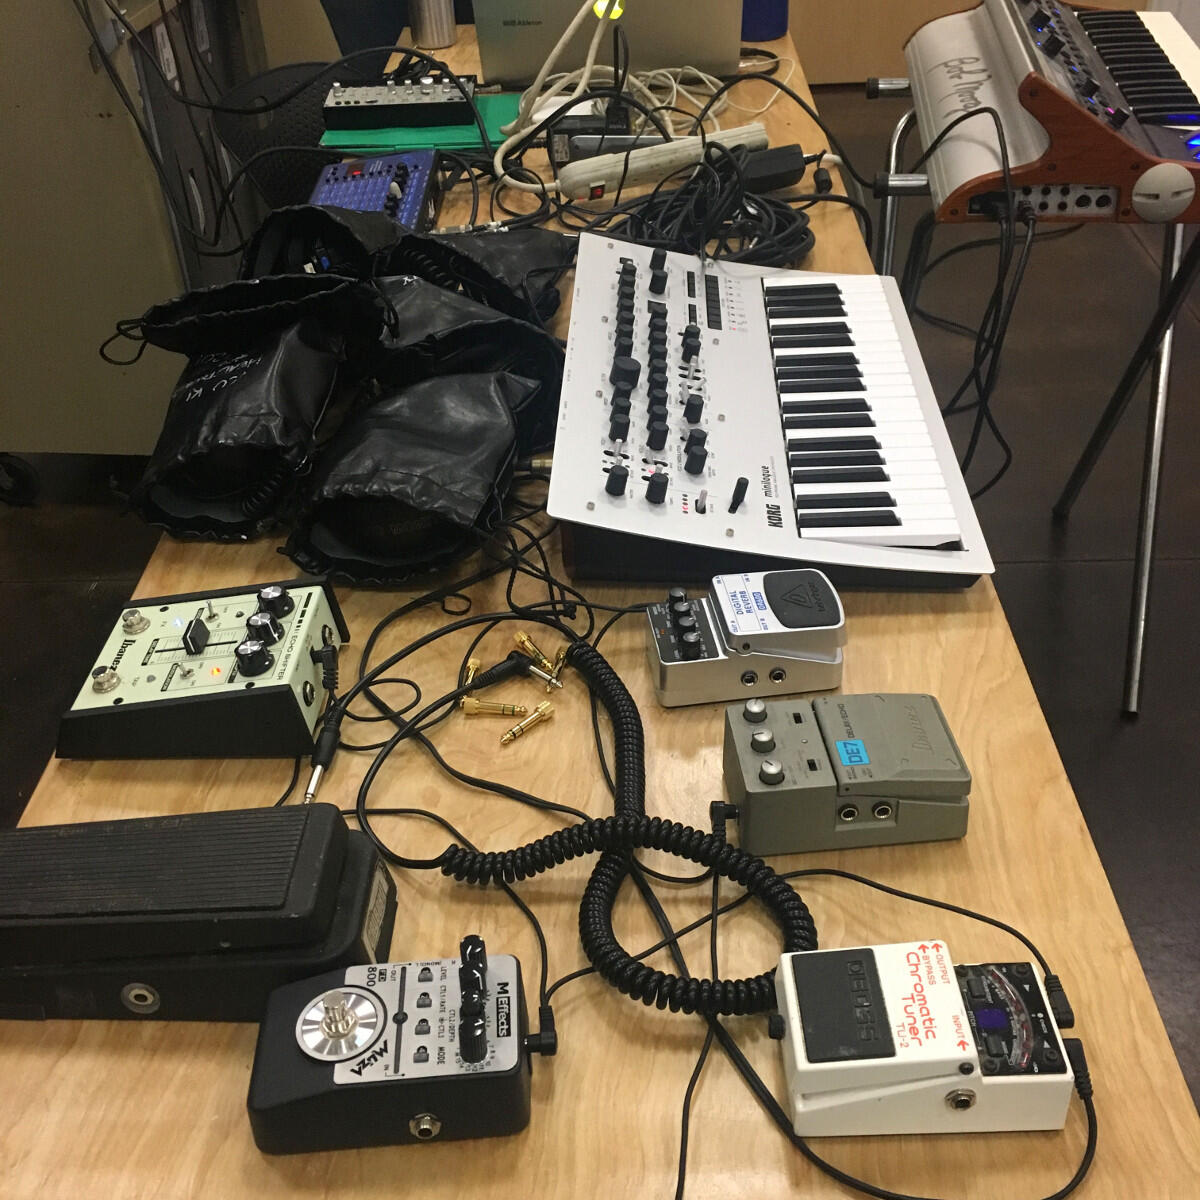 Some instruments used in the “Synthesized Sound: The Art of Beeps, Blips, and Twisting Knobs” workshop. 